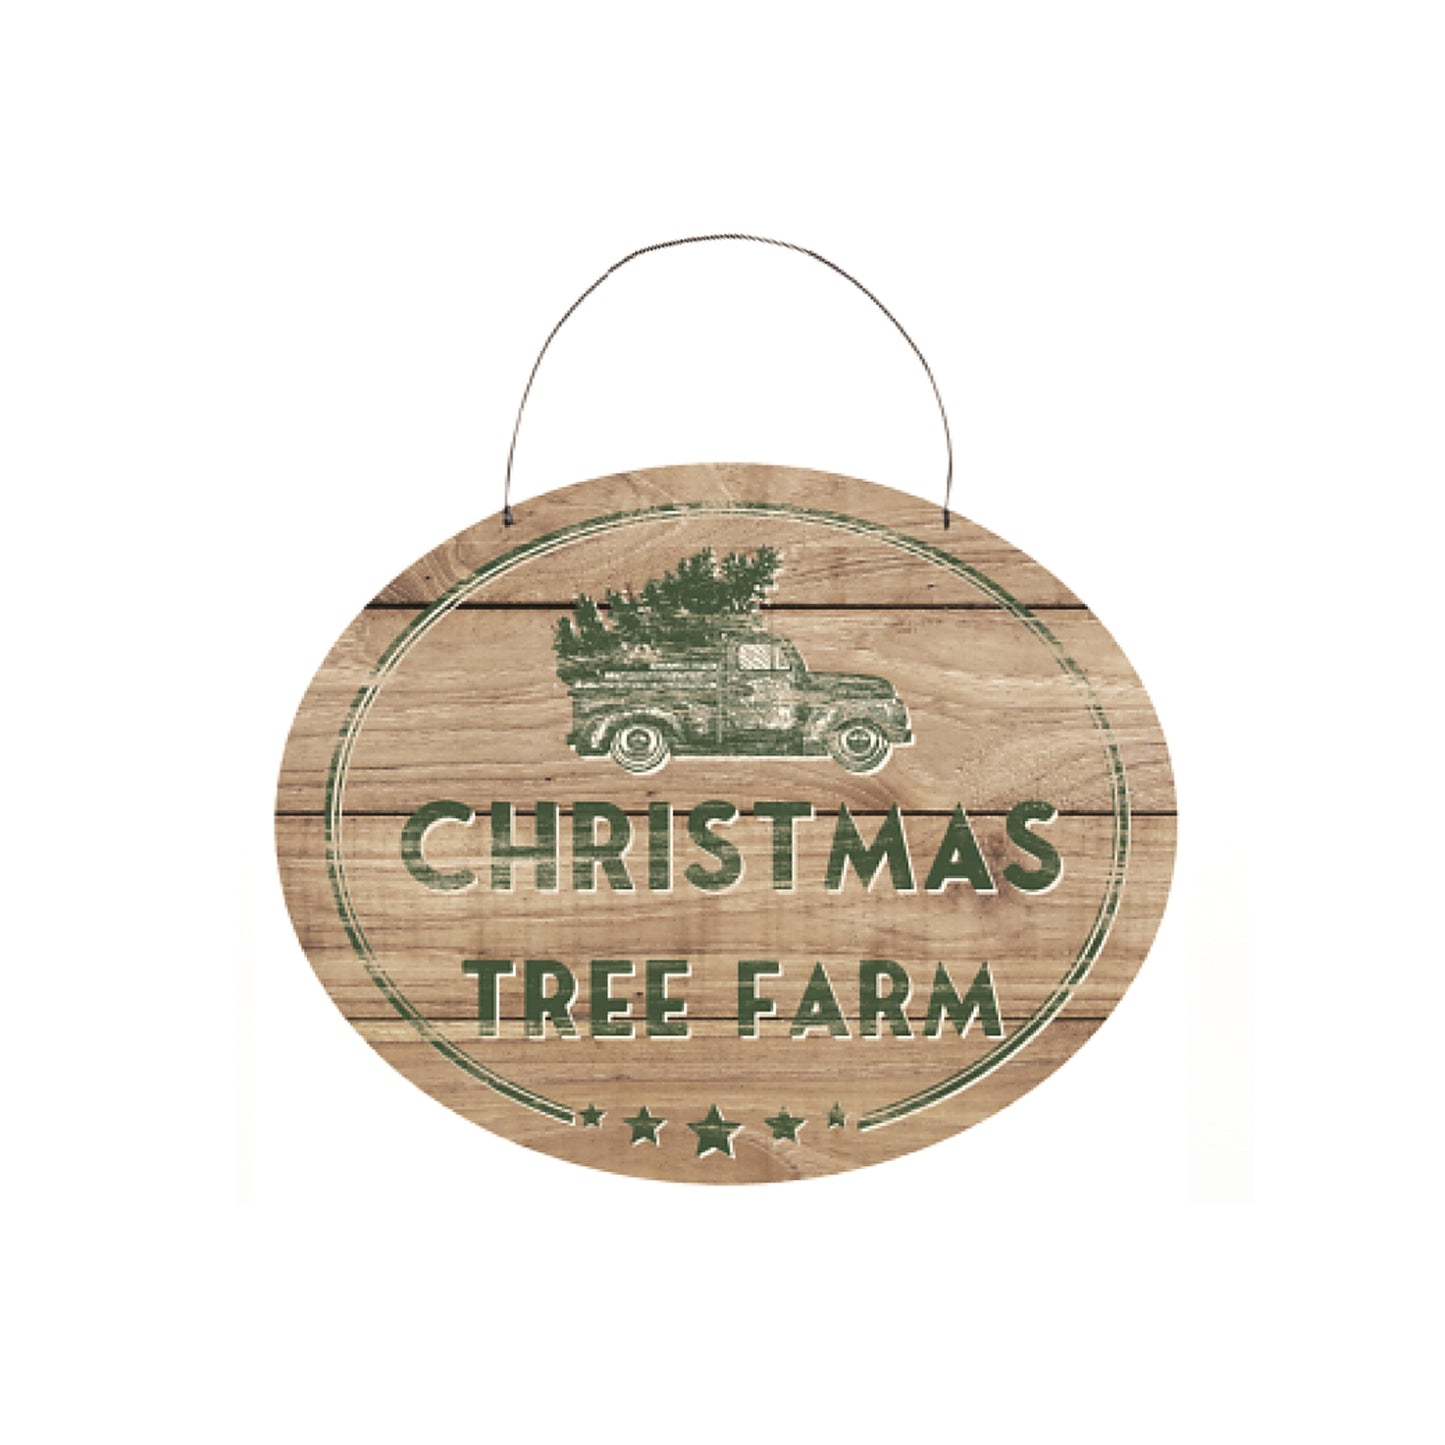 Christmas Tree Farm Sign with Rustic Wood Design 10"L